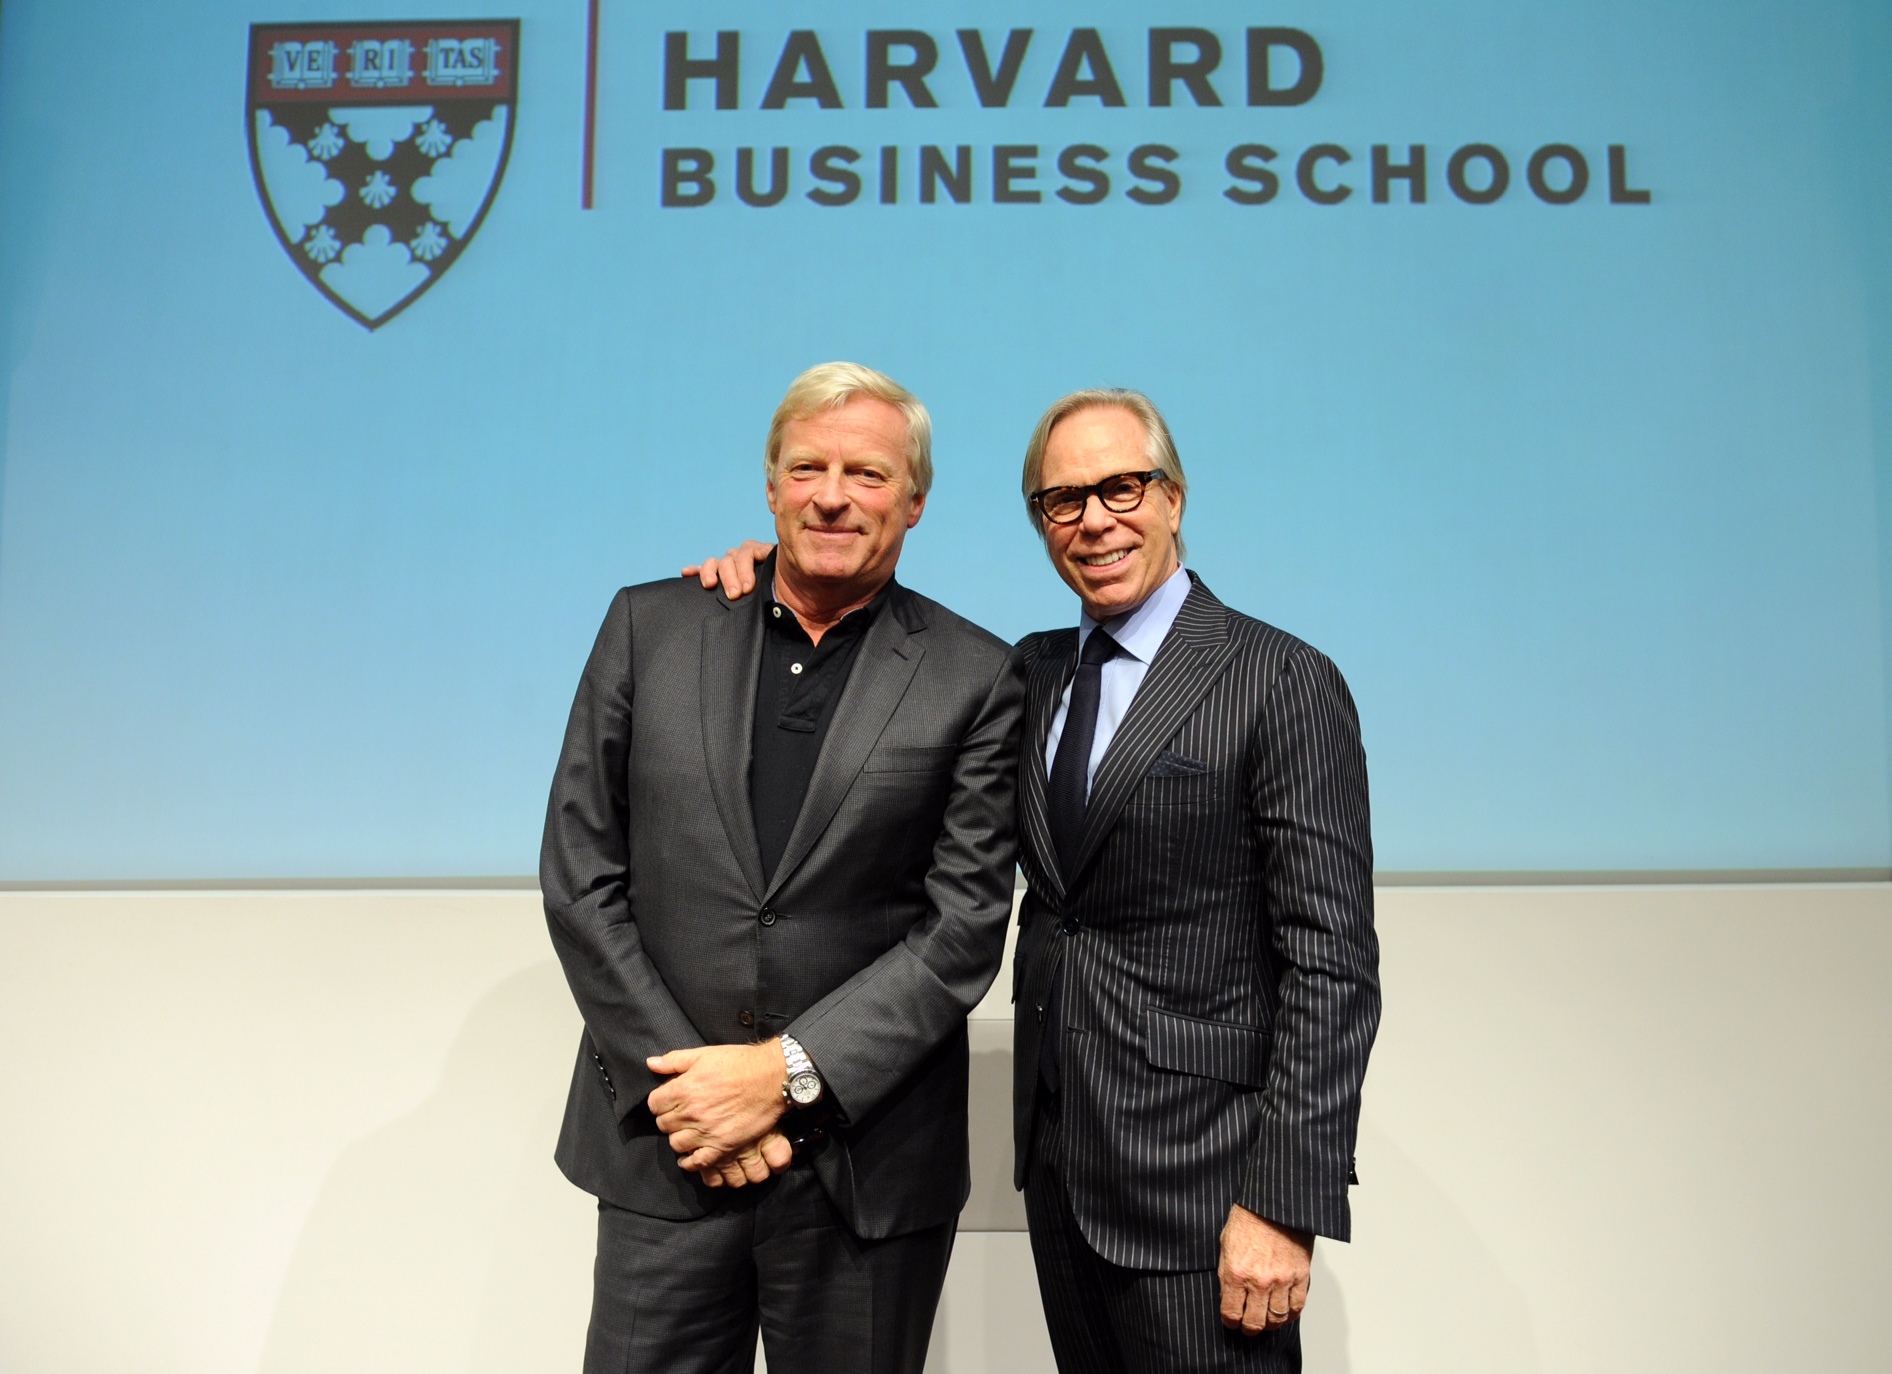 Tommy Hilfiger and Fred Speak at Harvard Business School | Business Wire